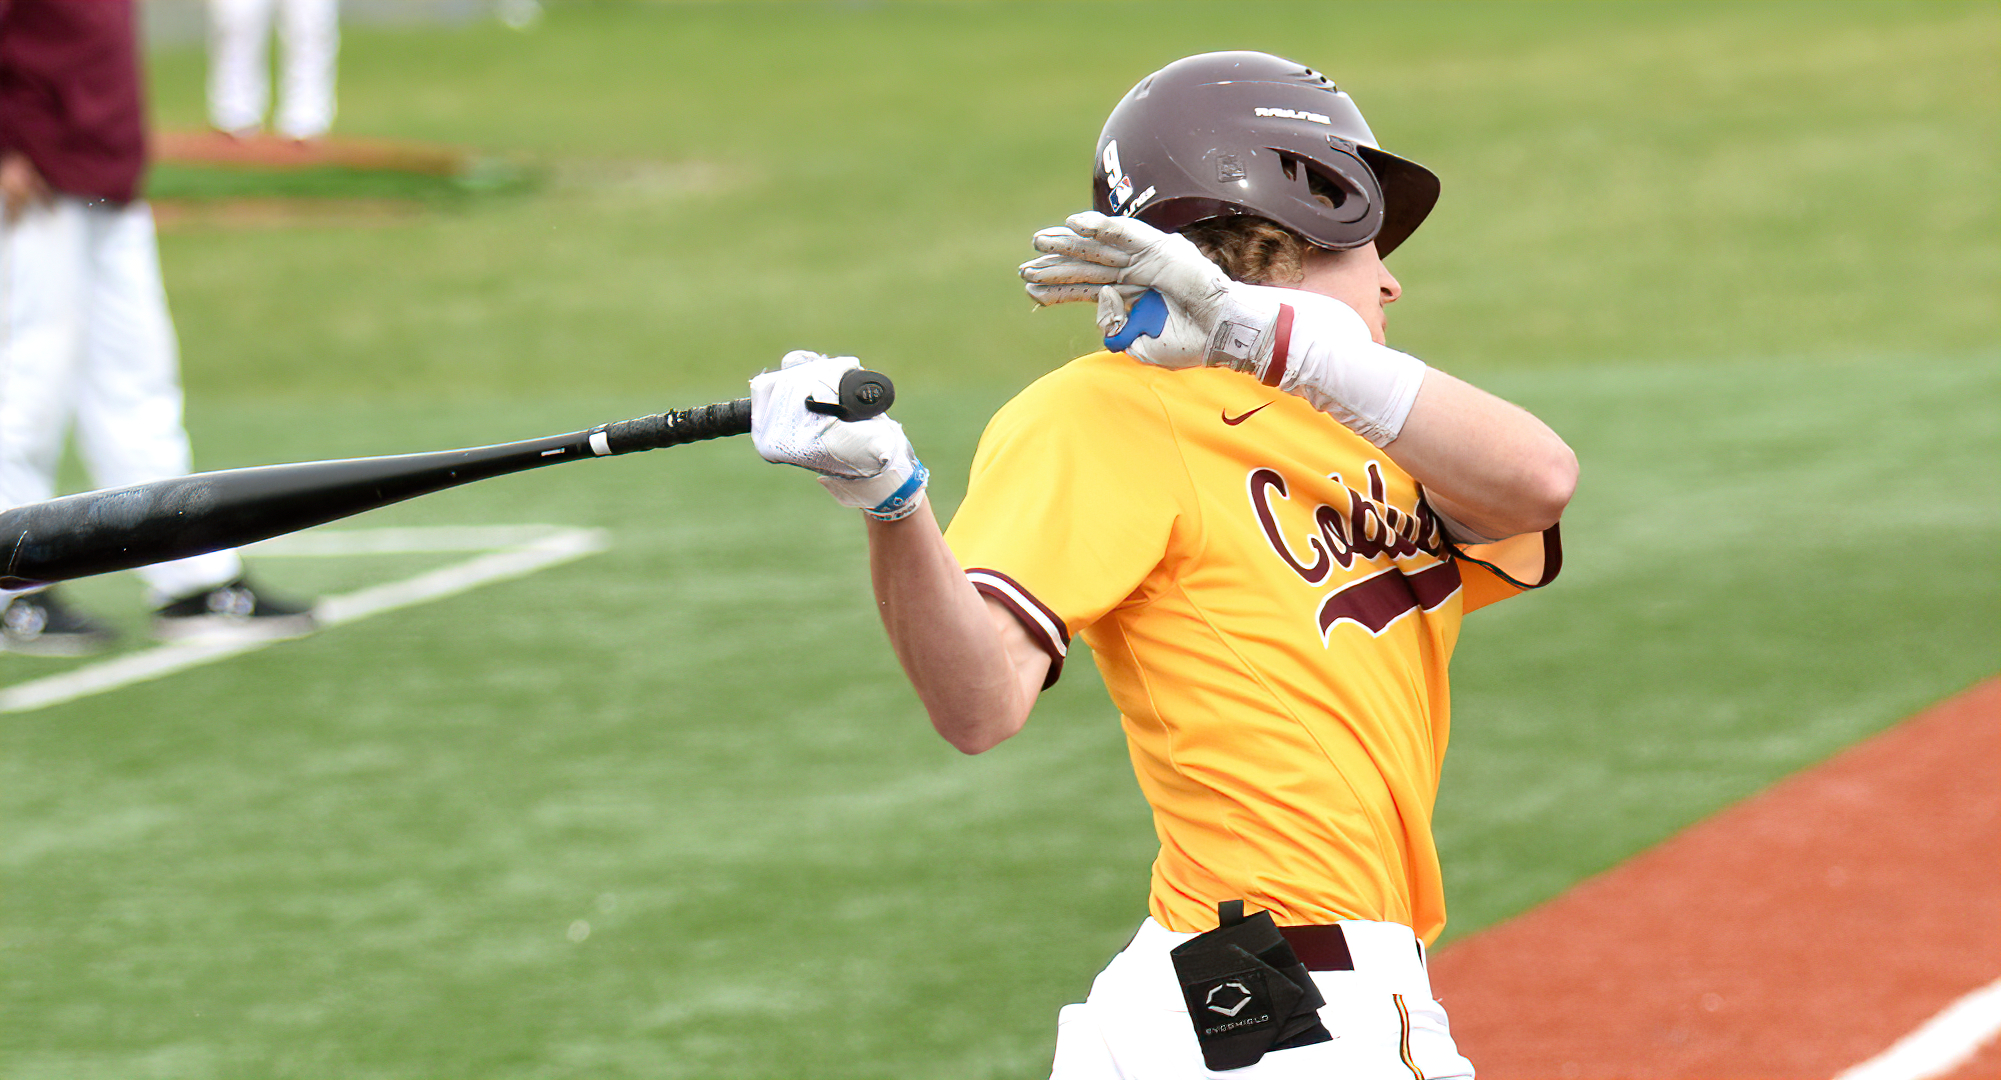 Thomas Horan hit the team's first home run of the year in the Cobbers' DH with Moravian and then scored the game-winning run in Game 2.